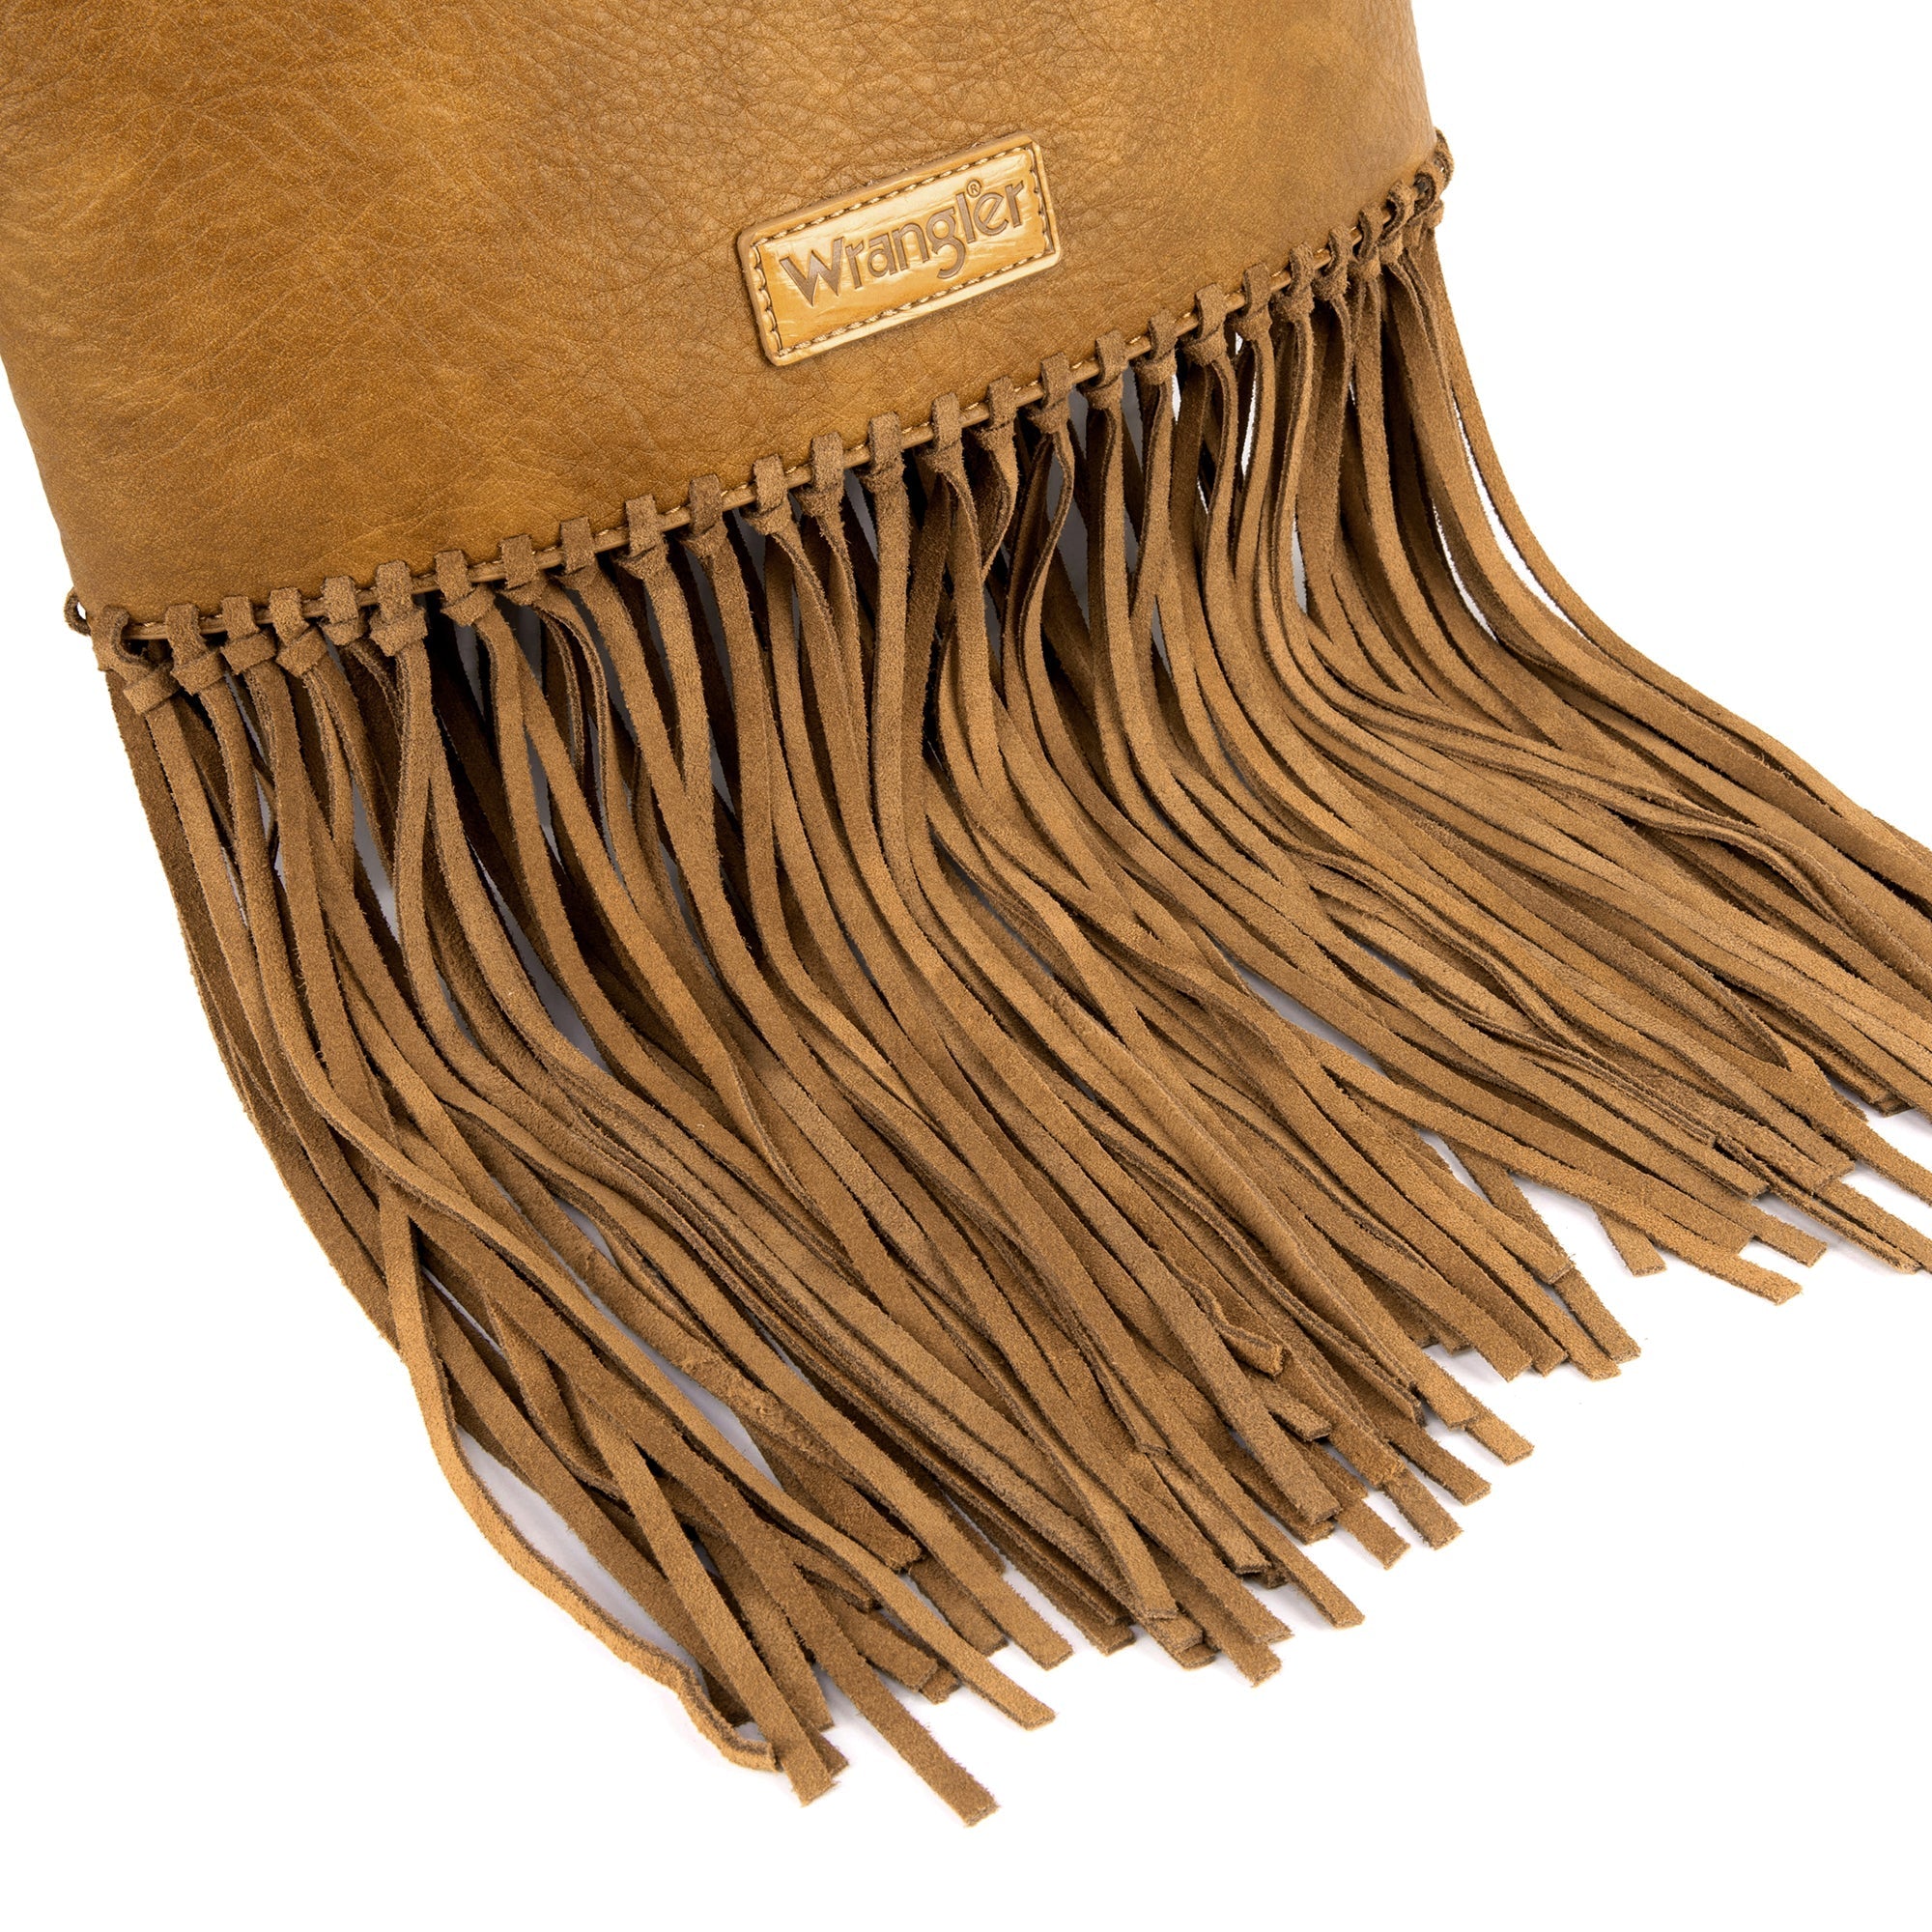 Cowhide fringe western turquoise crossbody – Northern Charm Boutique